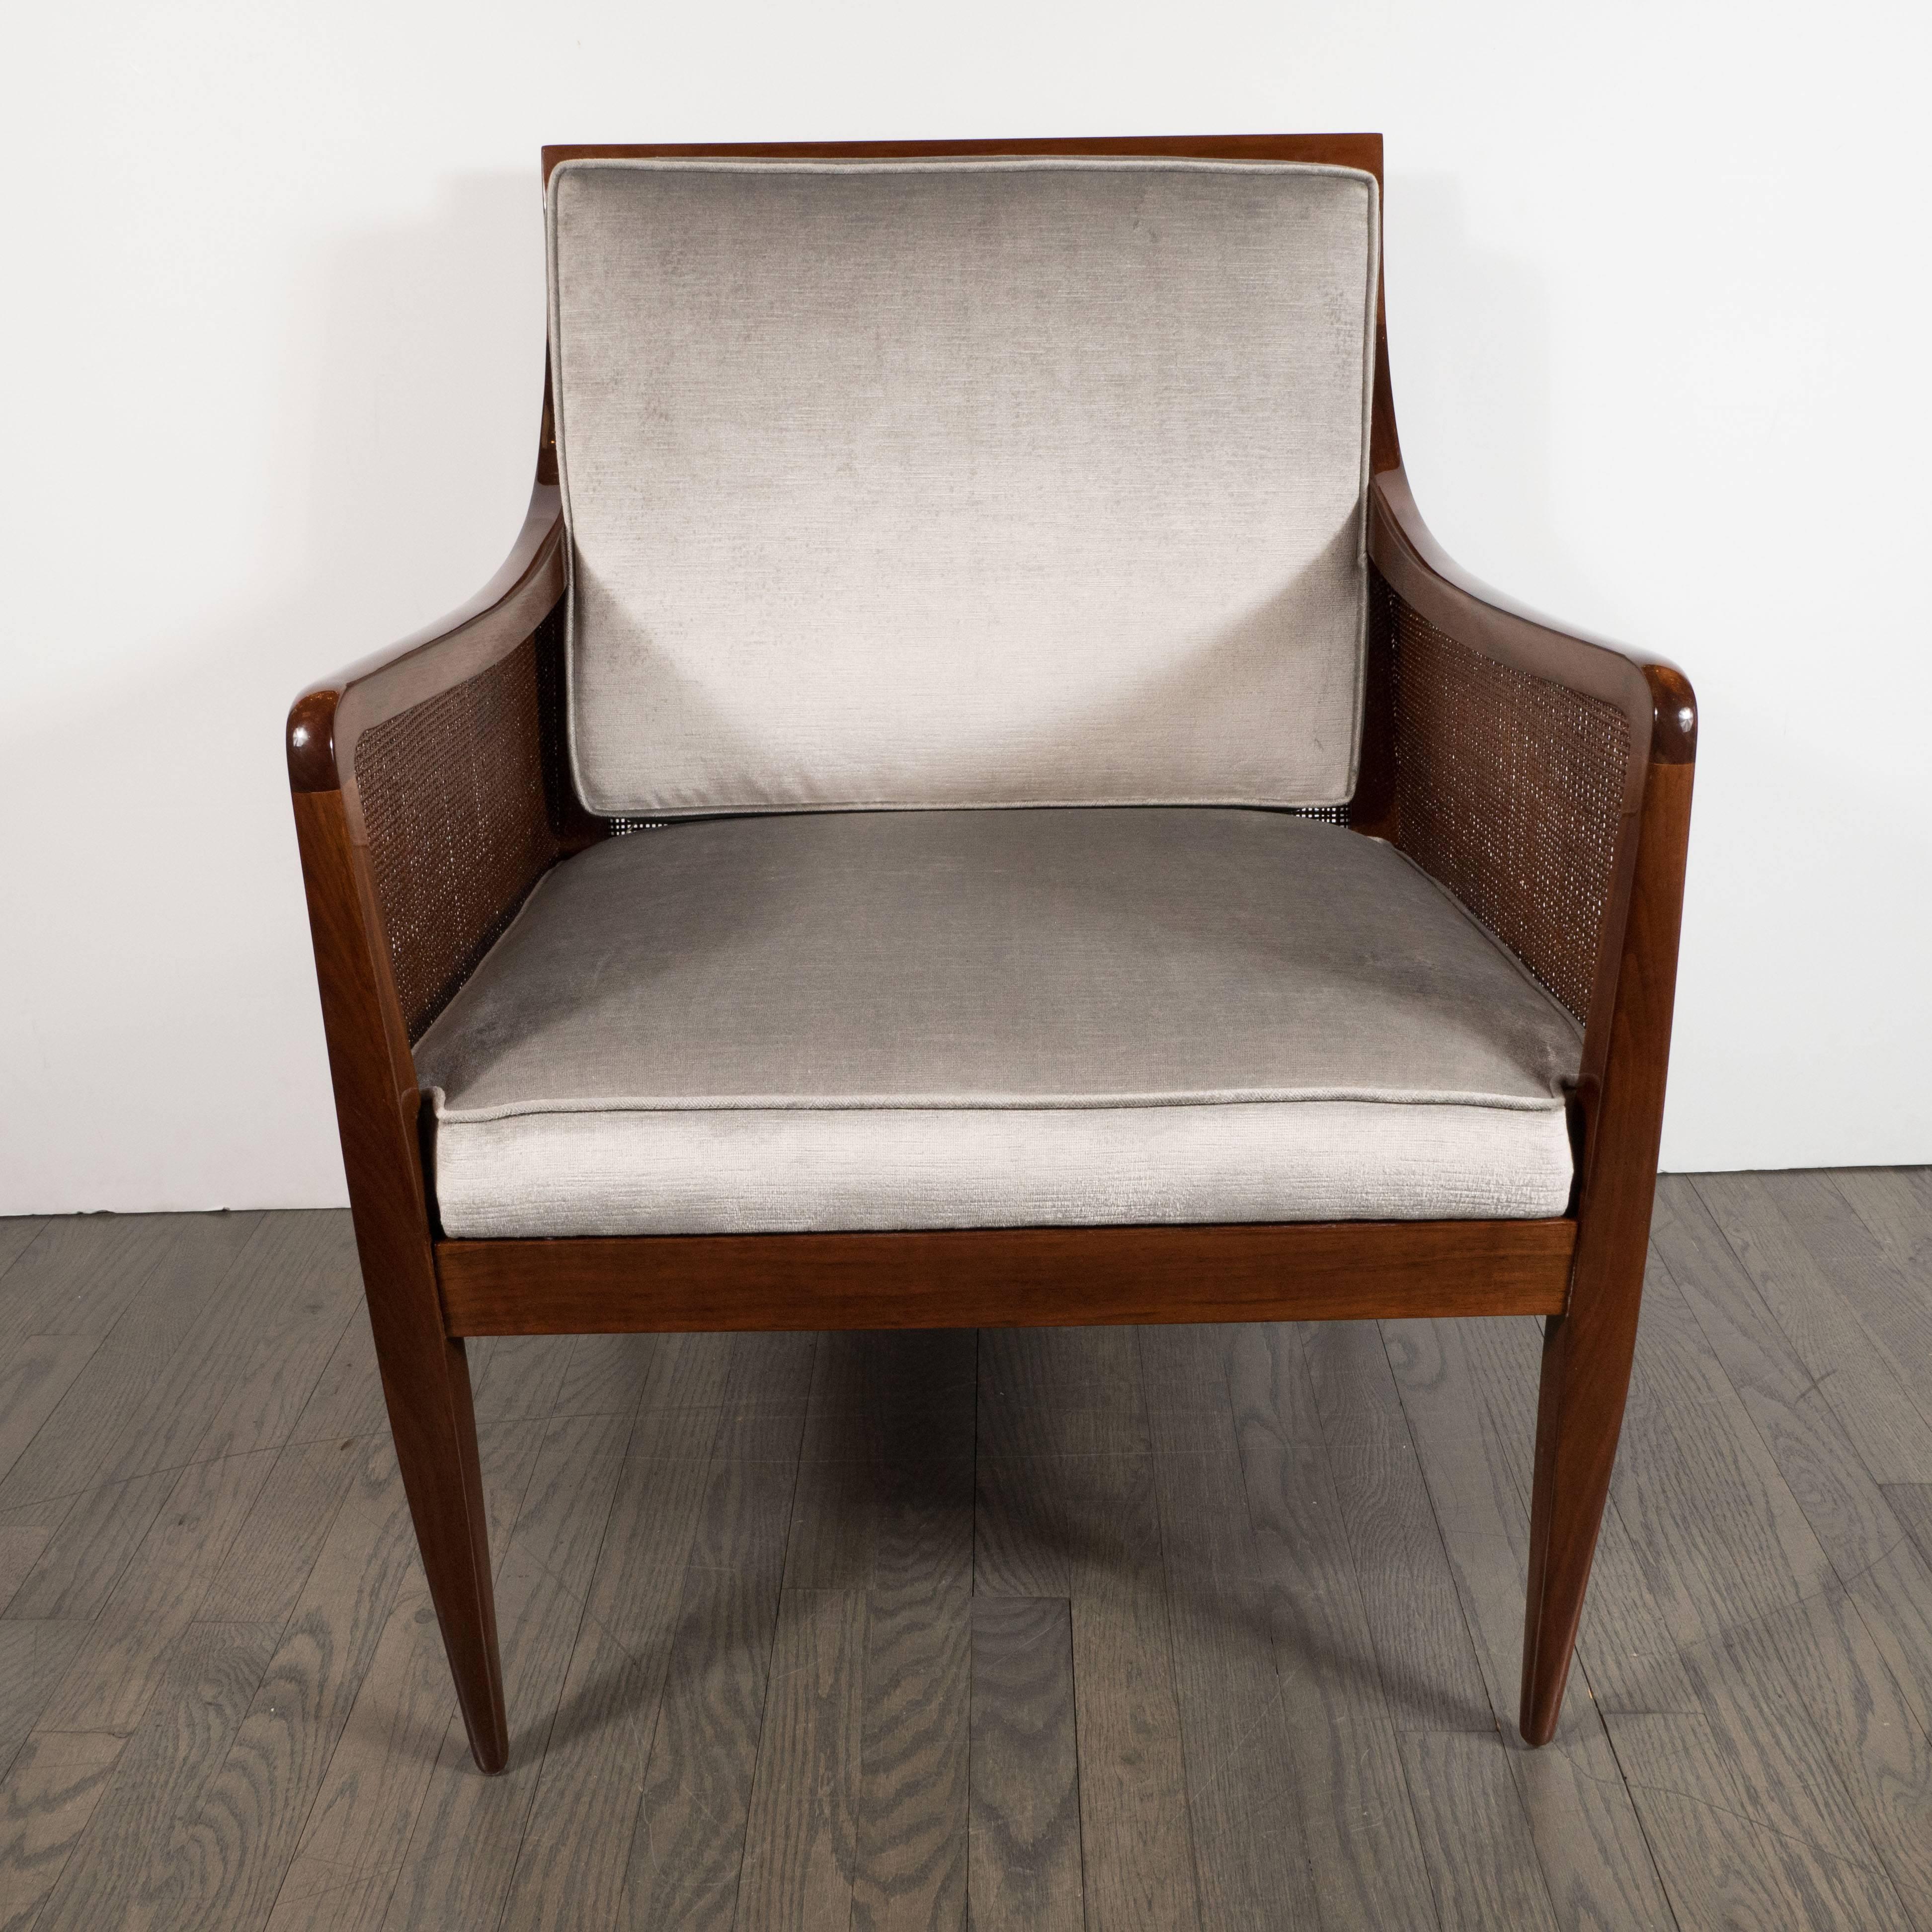 Sophisticated, elegant and unfussy, this chair represents the qualities that discerning collectors of first rate American Mid-Century Modern design prize. Realized circa 1960, this walnut chair features tapered rectangular legs with streamlined arms